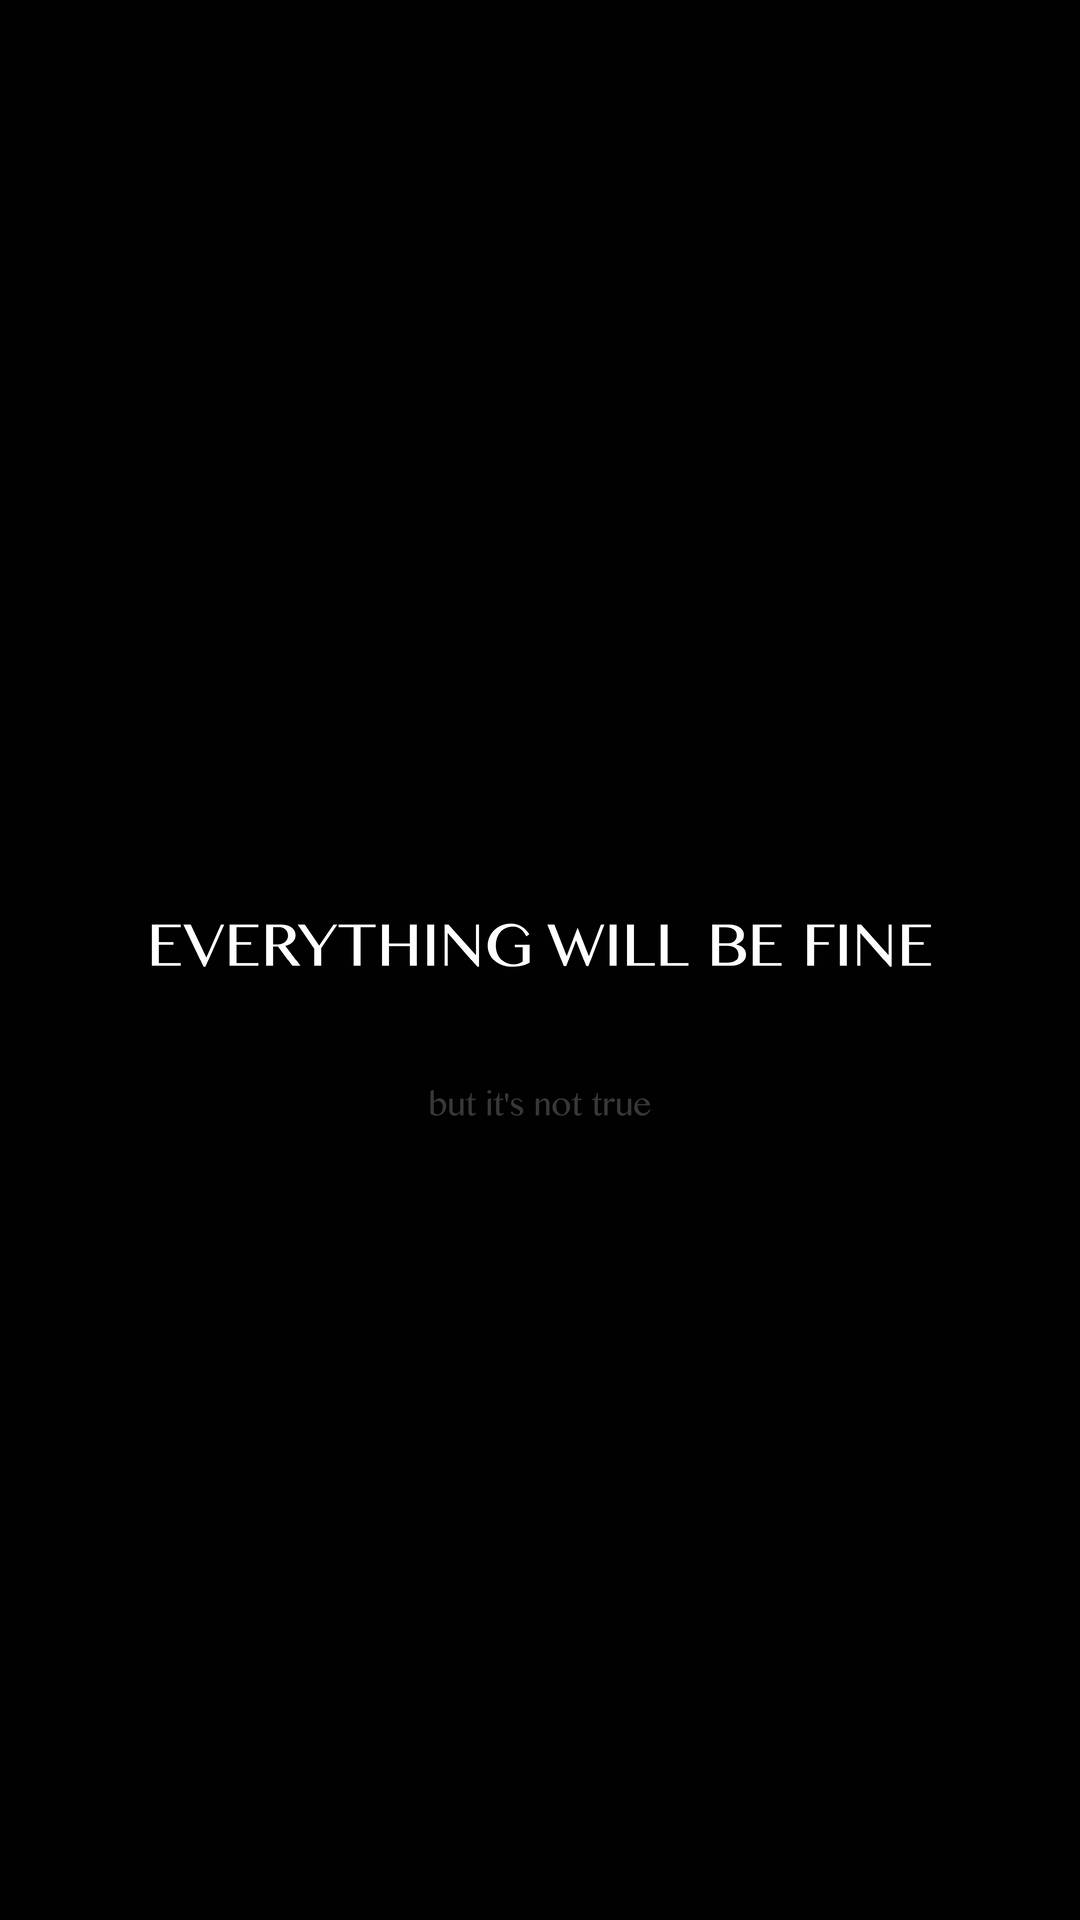 Everything Will Be Fine Inspirational Quote Background